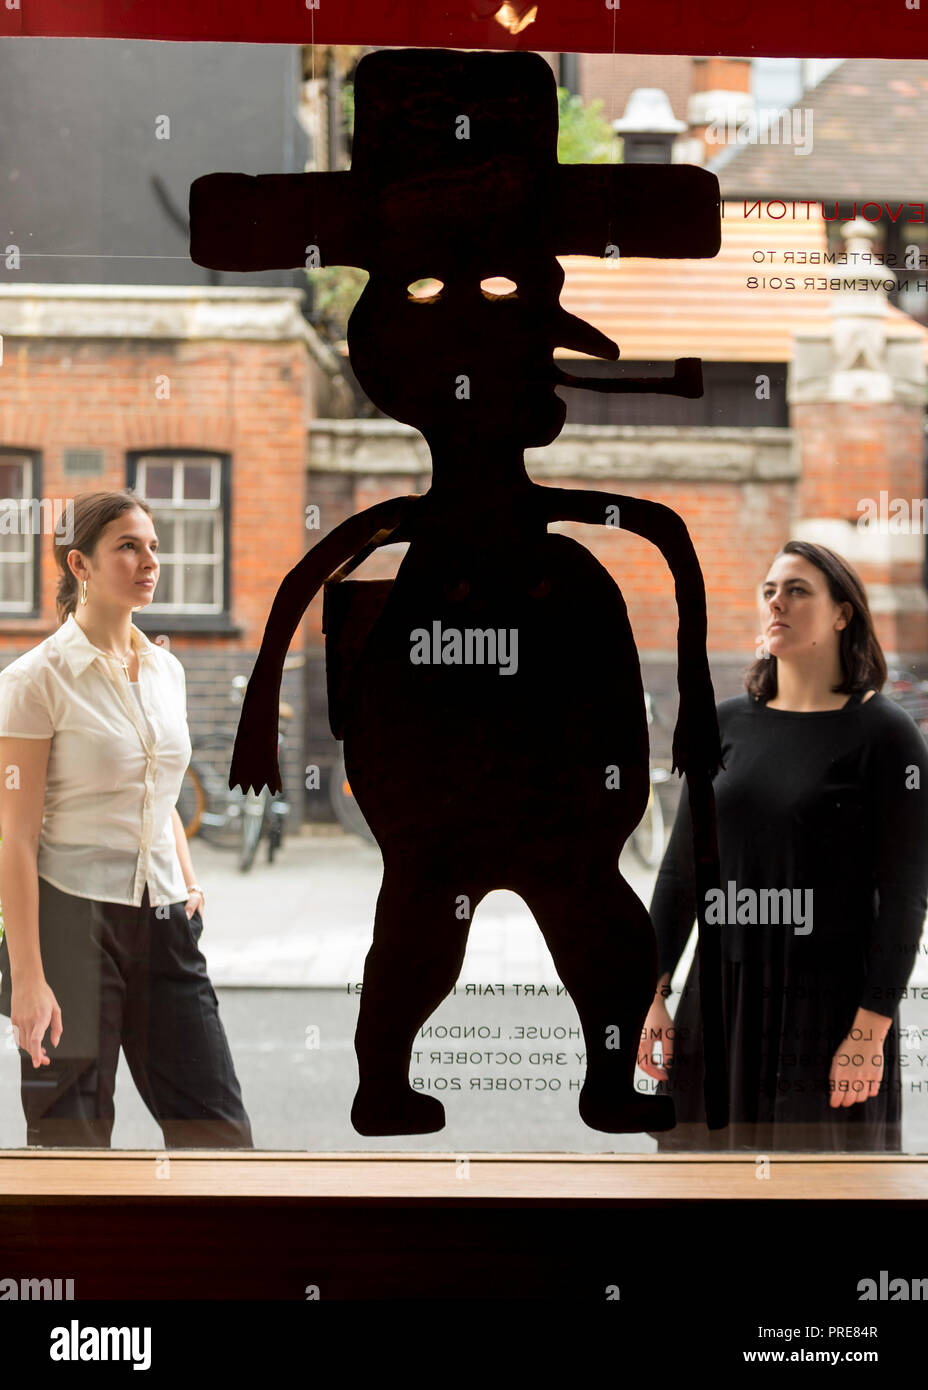 London, UK.  2 October 2018. Staff members view a sculpture by Georges Liautaud. Preview of "Art + Revolution in Haiti", an exhibition at The Gallery of Everything in Chiltern Street.  The exhibition, which coincides with Frieze Week, explores when Surrealism arrived in the former slave colony in 1945.  Works from artists from le Centre d'Art d'Haiti and from the personal collection of Andre Breton, the founder of Surrealism, are on display until 11 November 2018.   Credit: Stephen Chung / Alamy Live News Stock Photo